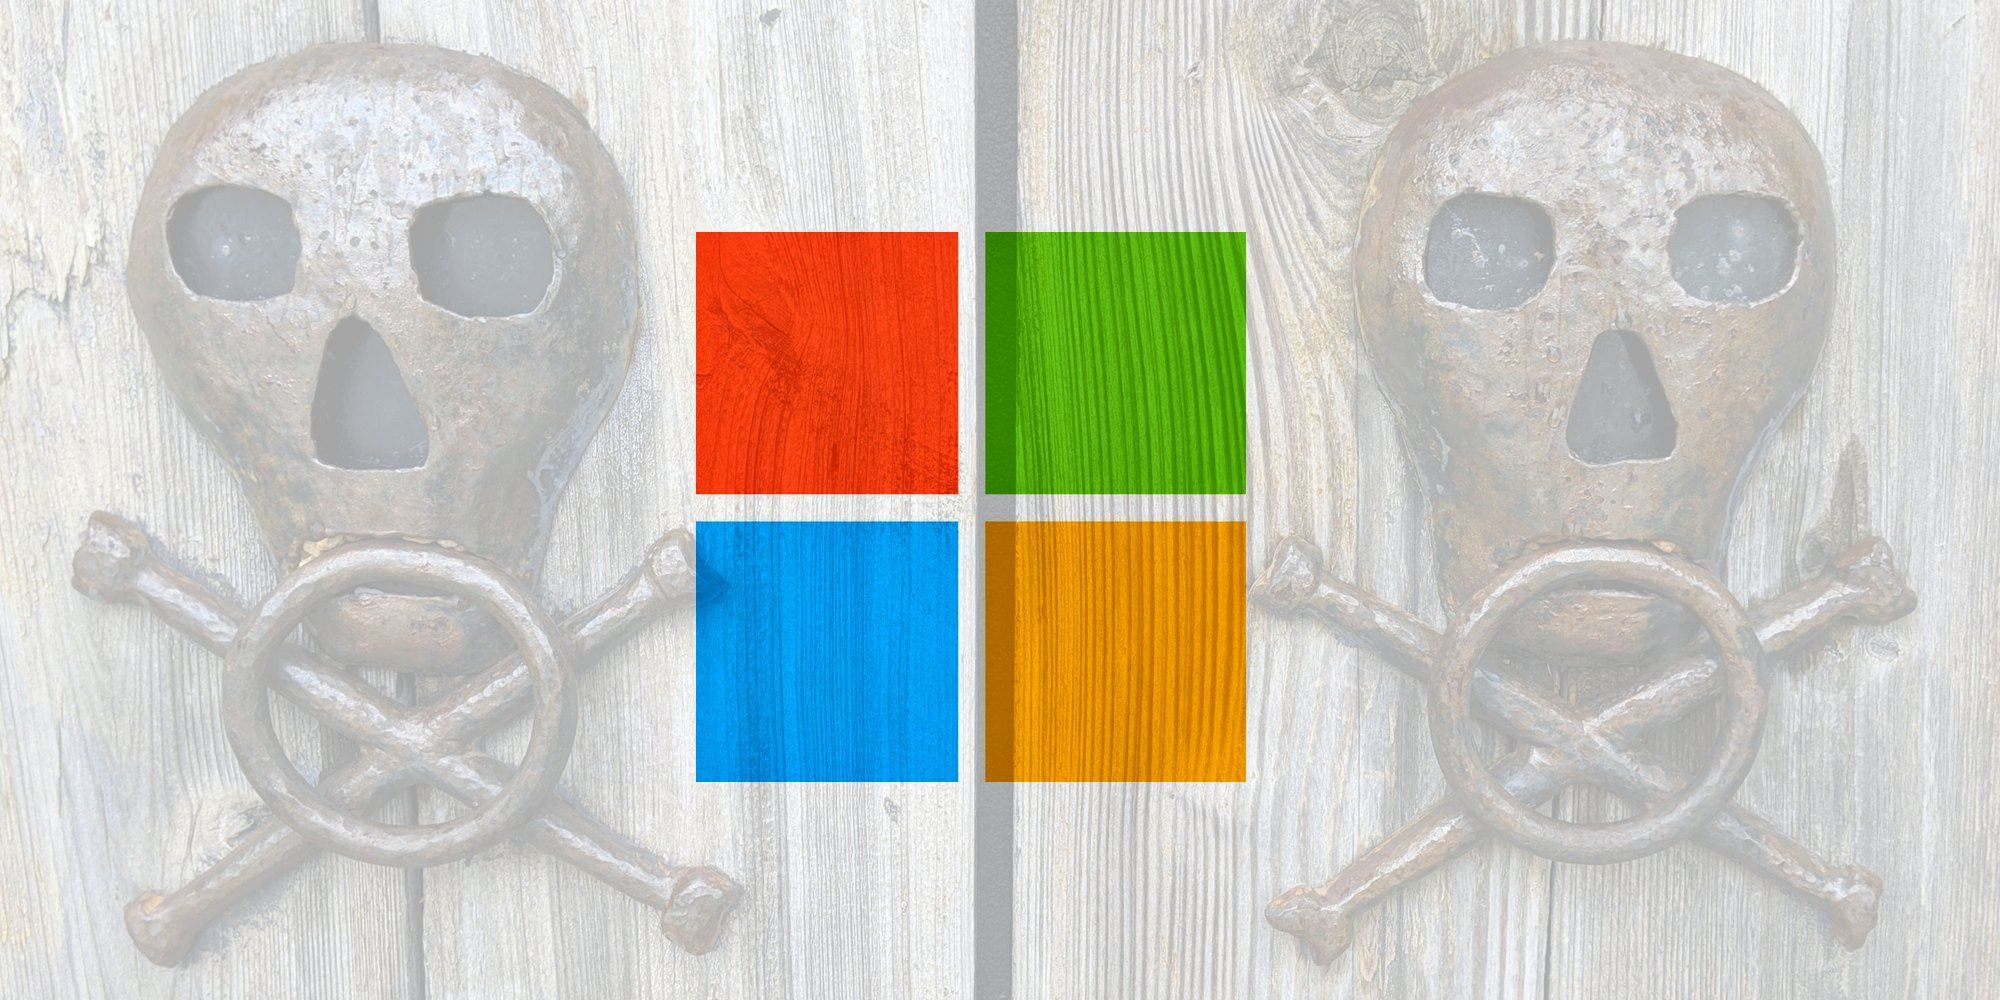 Microsoft Is Offering 50% Off Its Office Apps If You Already Illegally Pirated Them